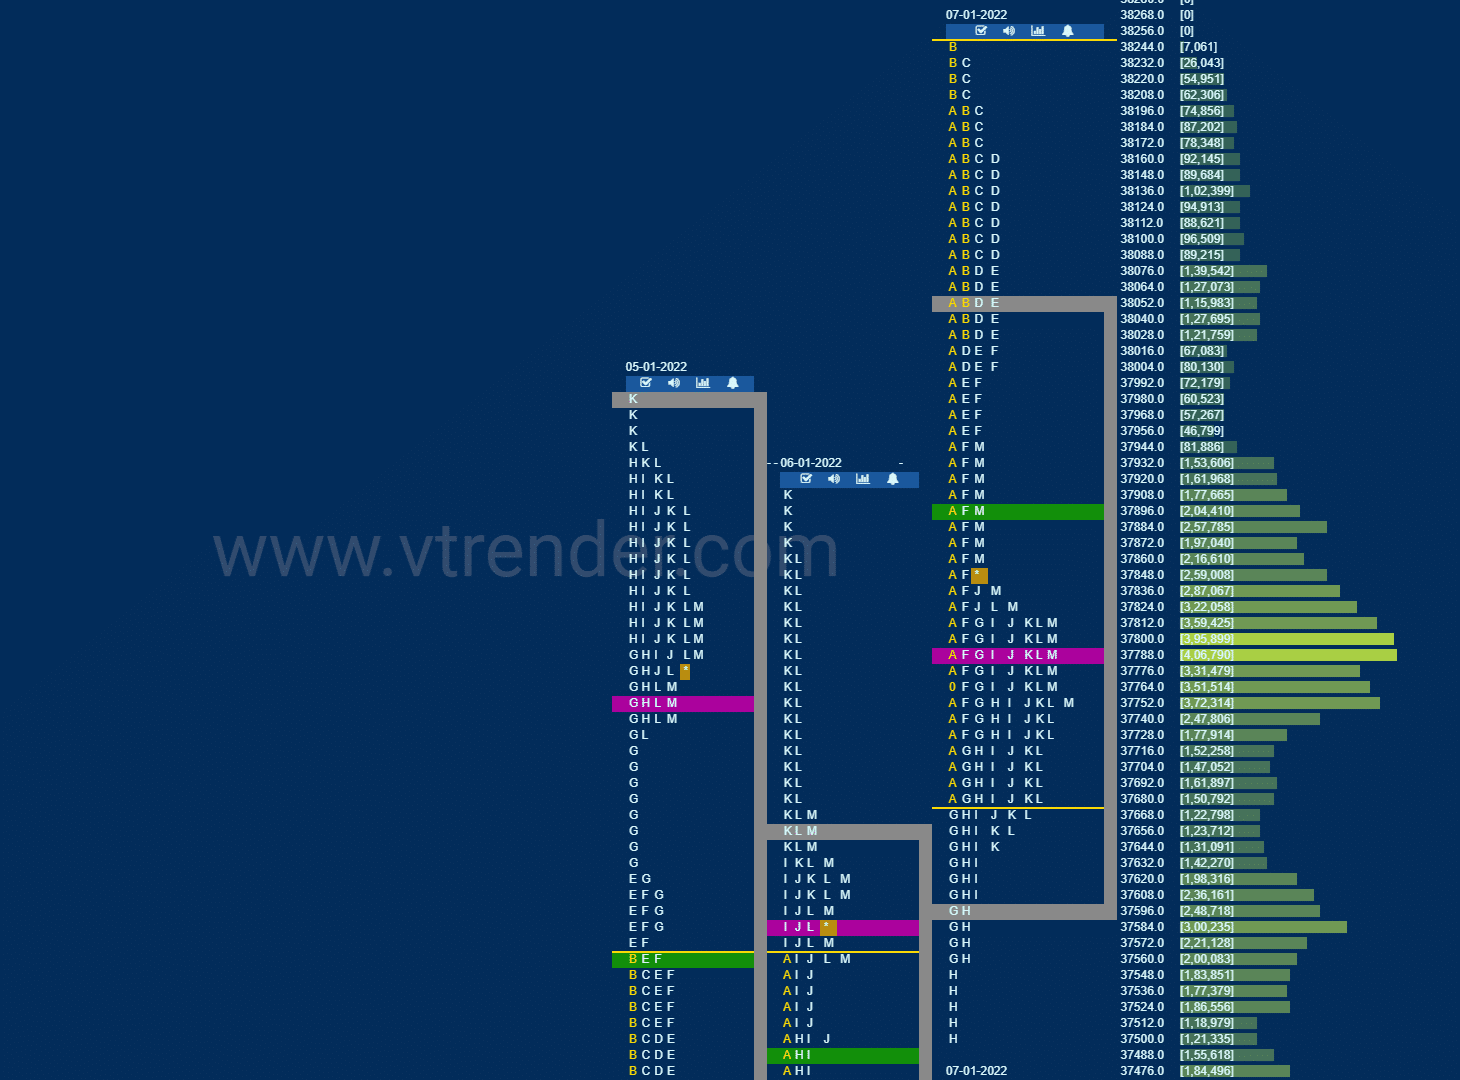 Bnf 5 Market Profile Analysis Dated 07Th January 2022 Banknifty Futures, Charts, Day Trading, Intraday Trading, Intraday Trading Strategies, Market Profile, Market Profile Trading Strategies, Nifty Futures, Order Flow Analysis, Support And Resistance, Technical Analysis, Trading Strategies, Volume Profile Trading